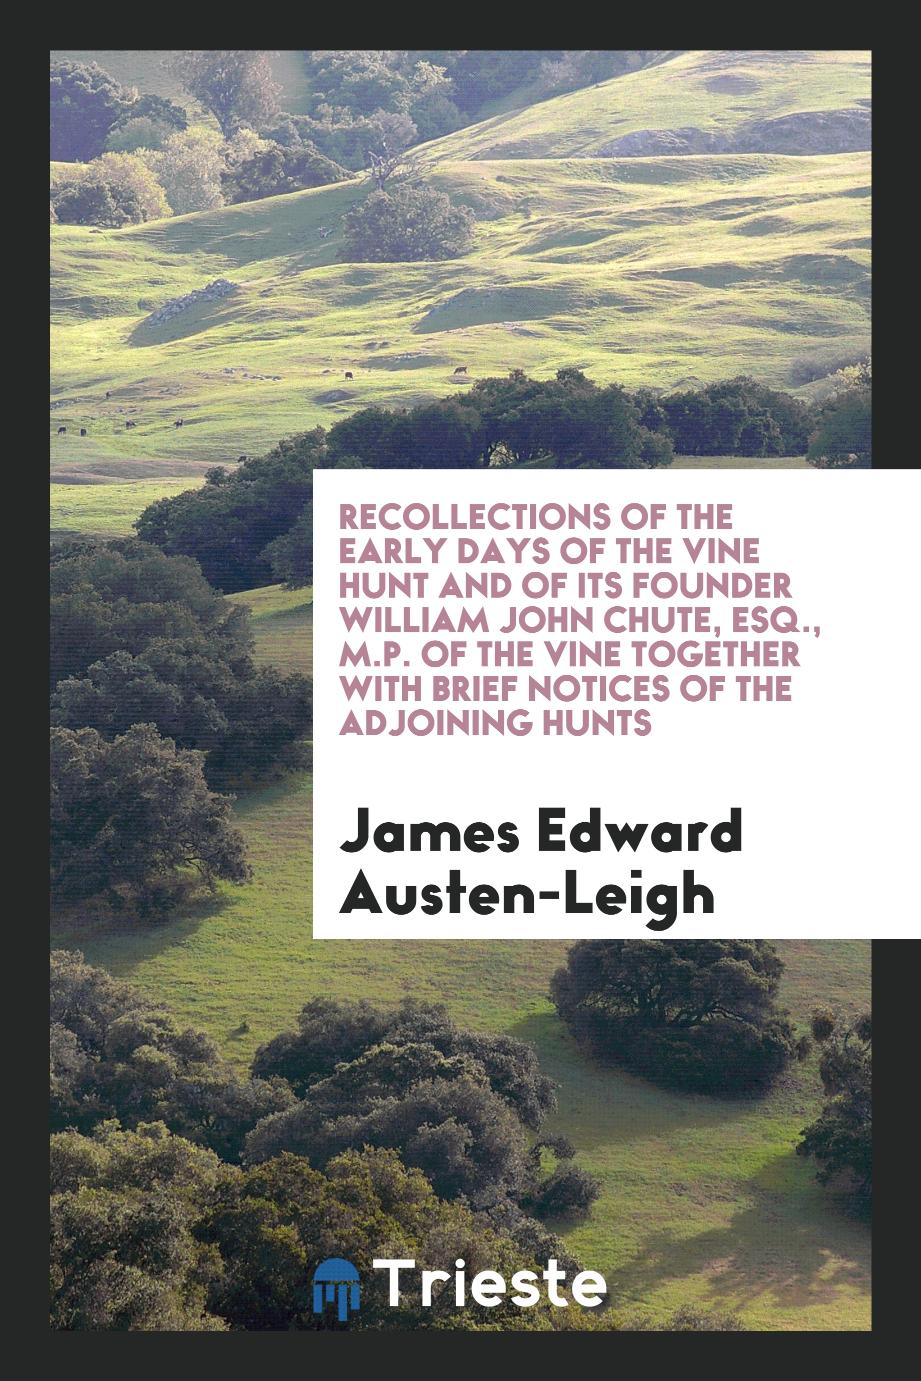 Recollections of the Early Days of the Vine Hunt and of Its Founder William John Chute, Esq., M.P. Of the Vine Together with Brief Notices of the Adjoining Hunts